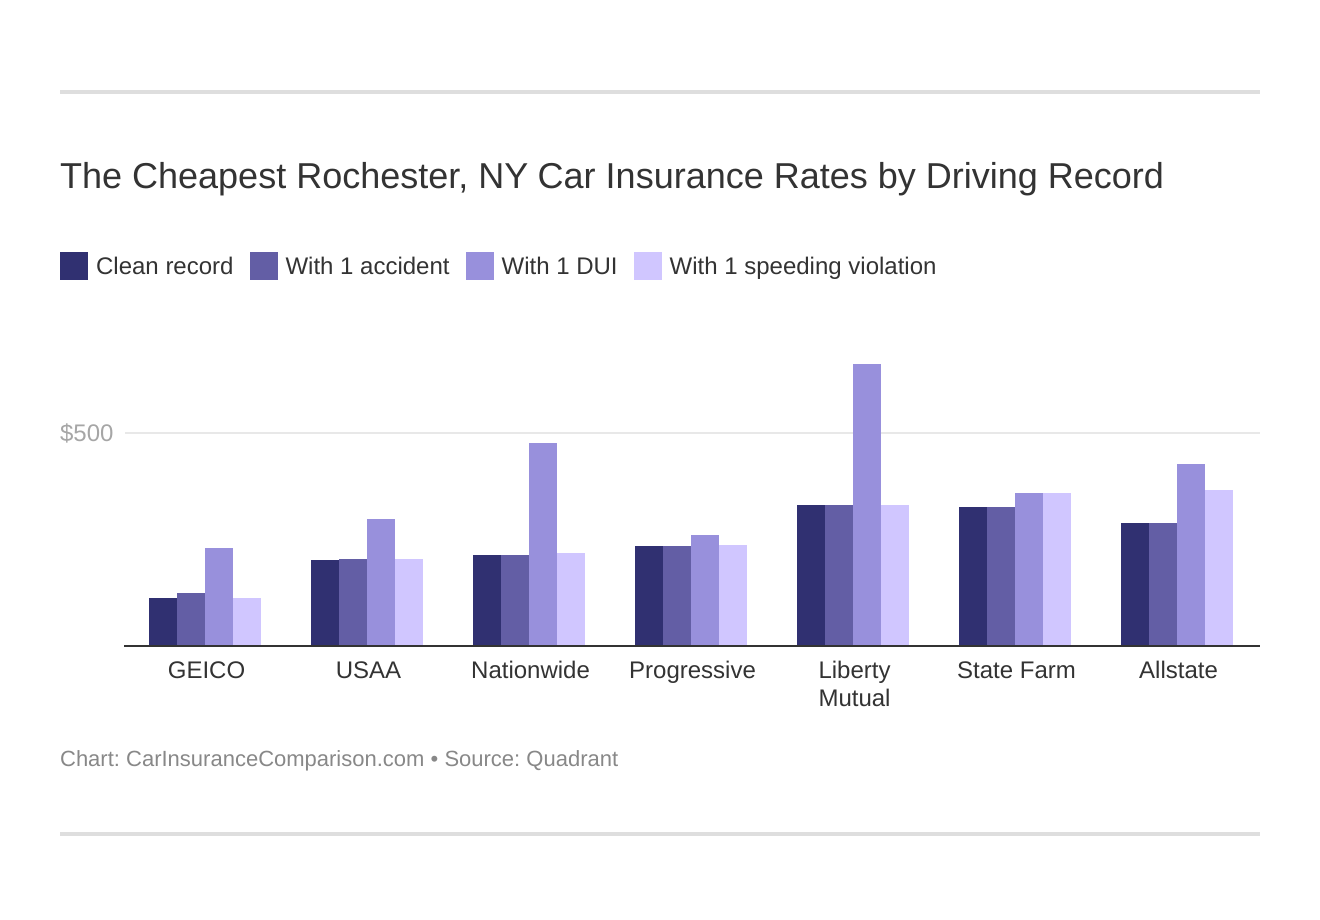 The Cheapest Rochester, NY Car Insurance Rates by Driving Record